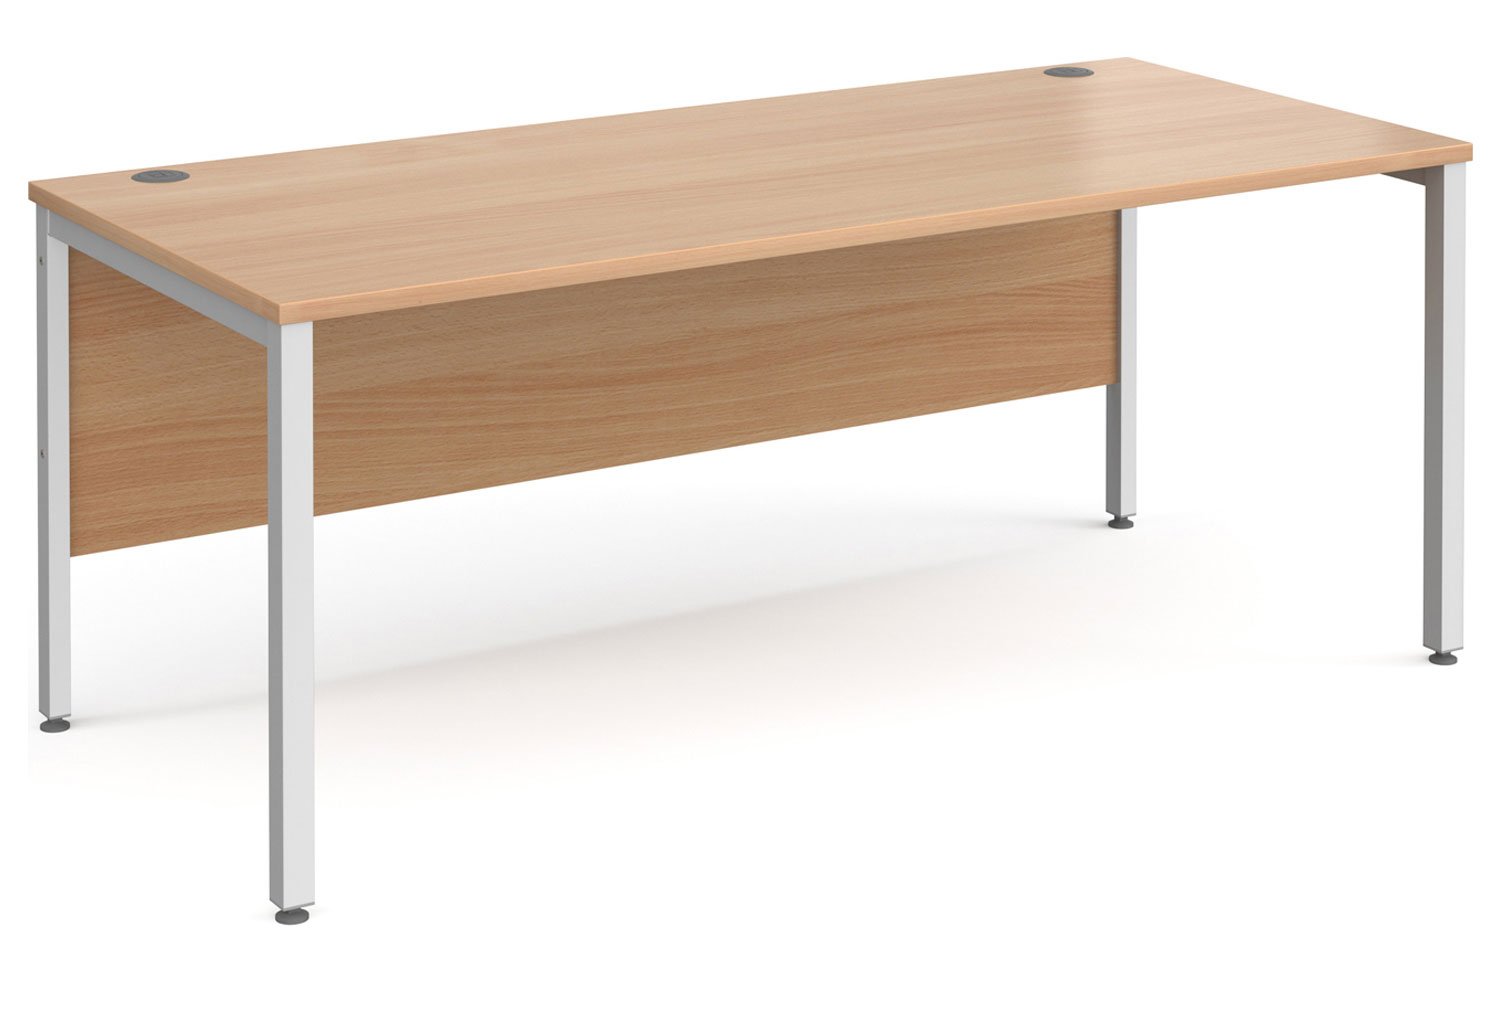 Tully Bench Rectangular Office Desk 180wx80dx73h (cm), Beech, Express Delivery